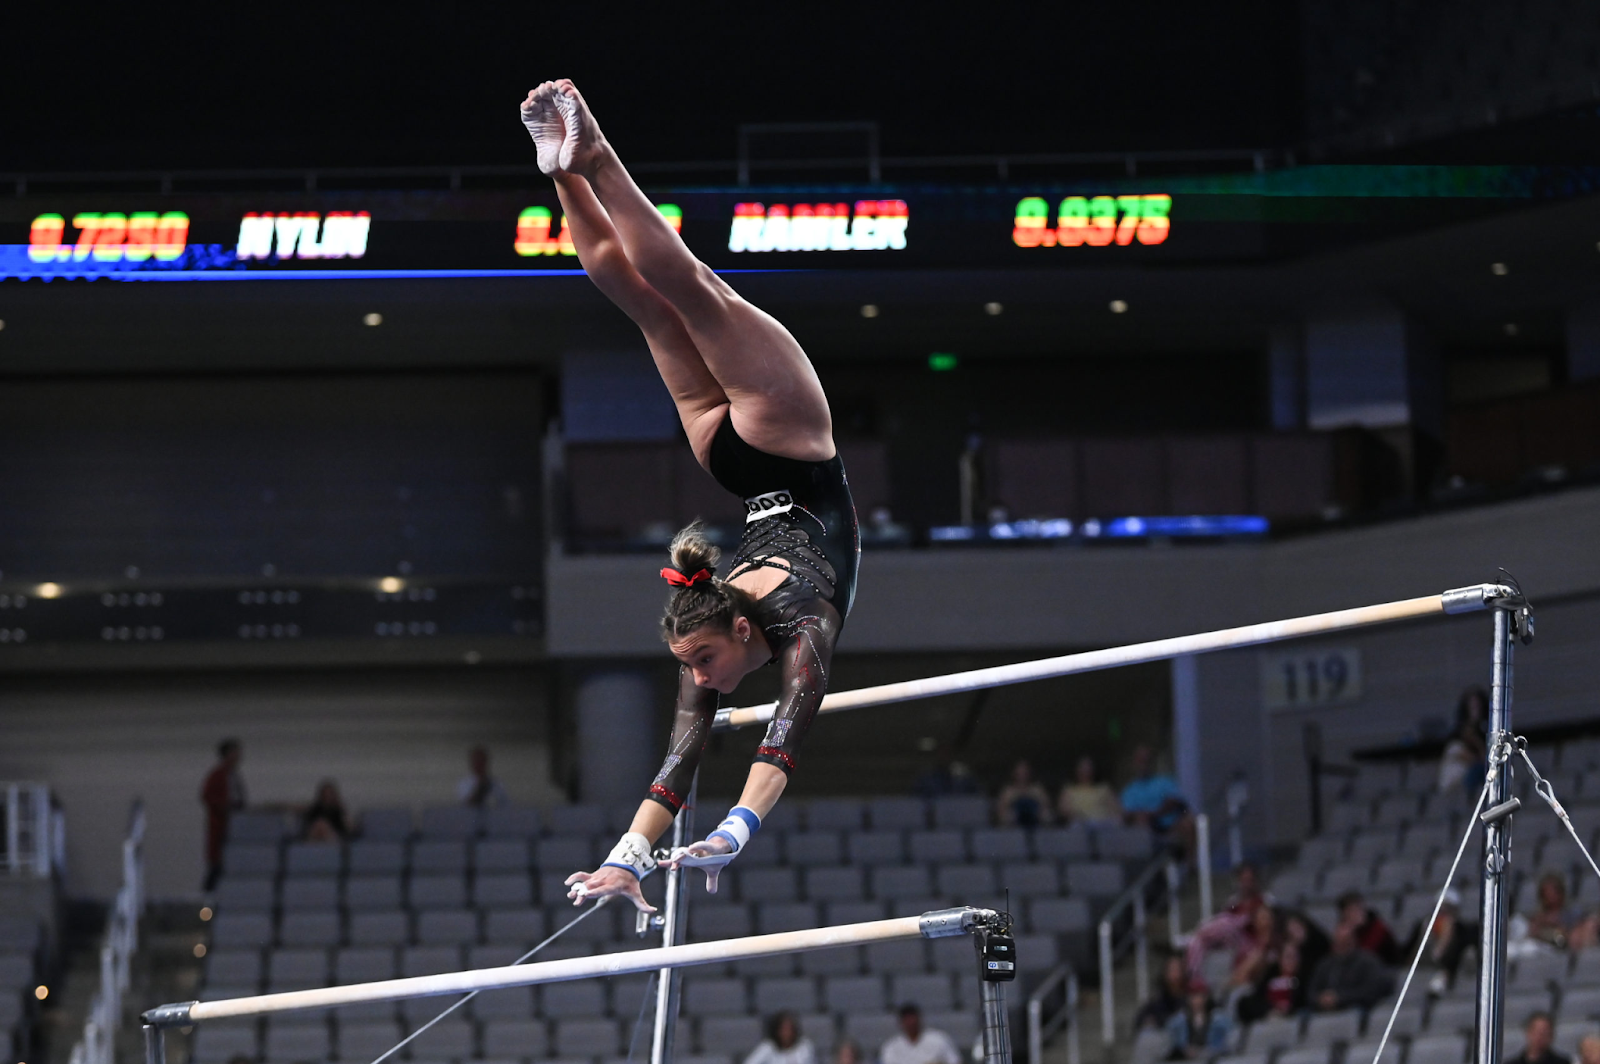 Iconic Moves of Artistic Gymnastics - Release and Catch on Bars